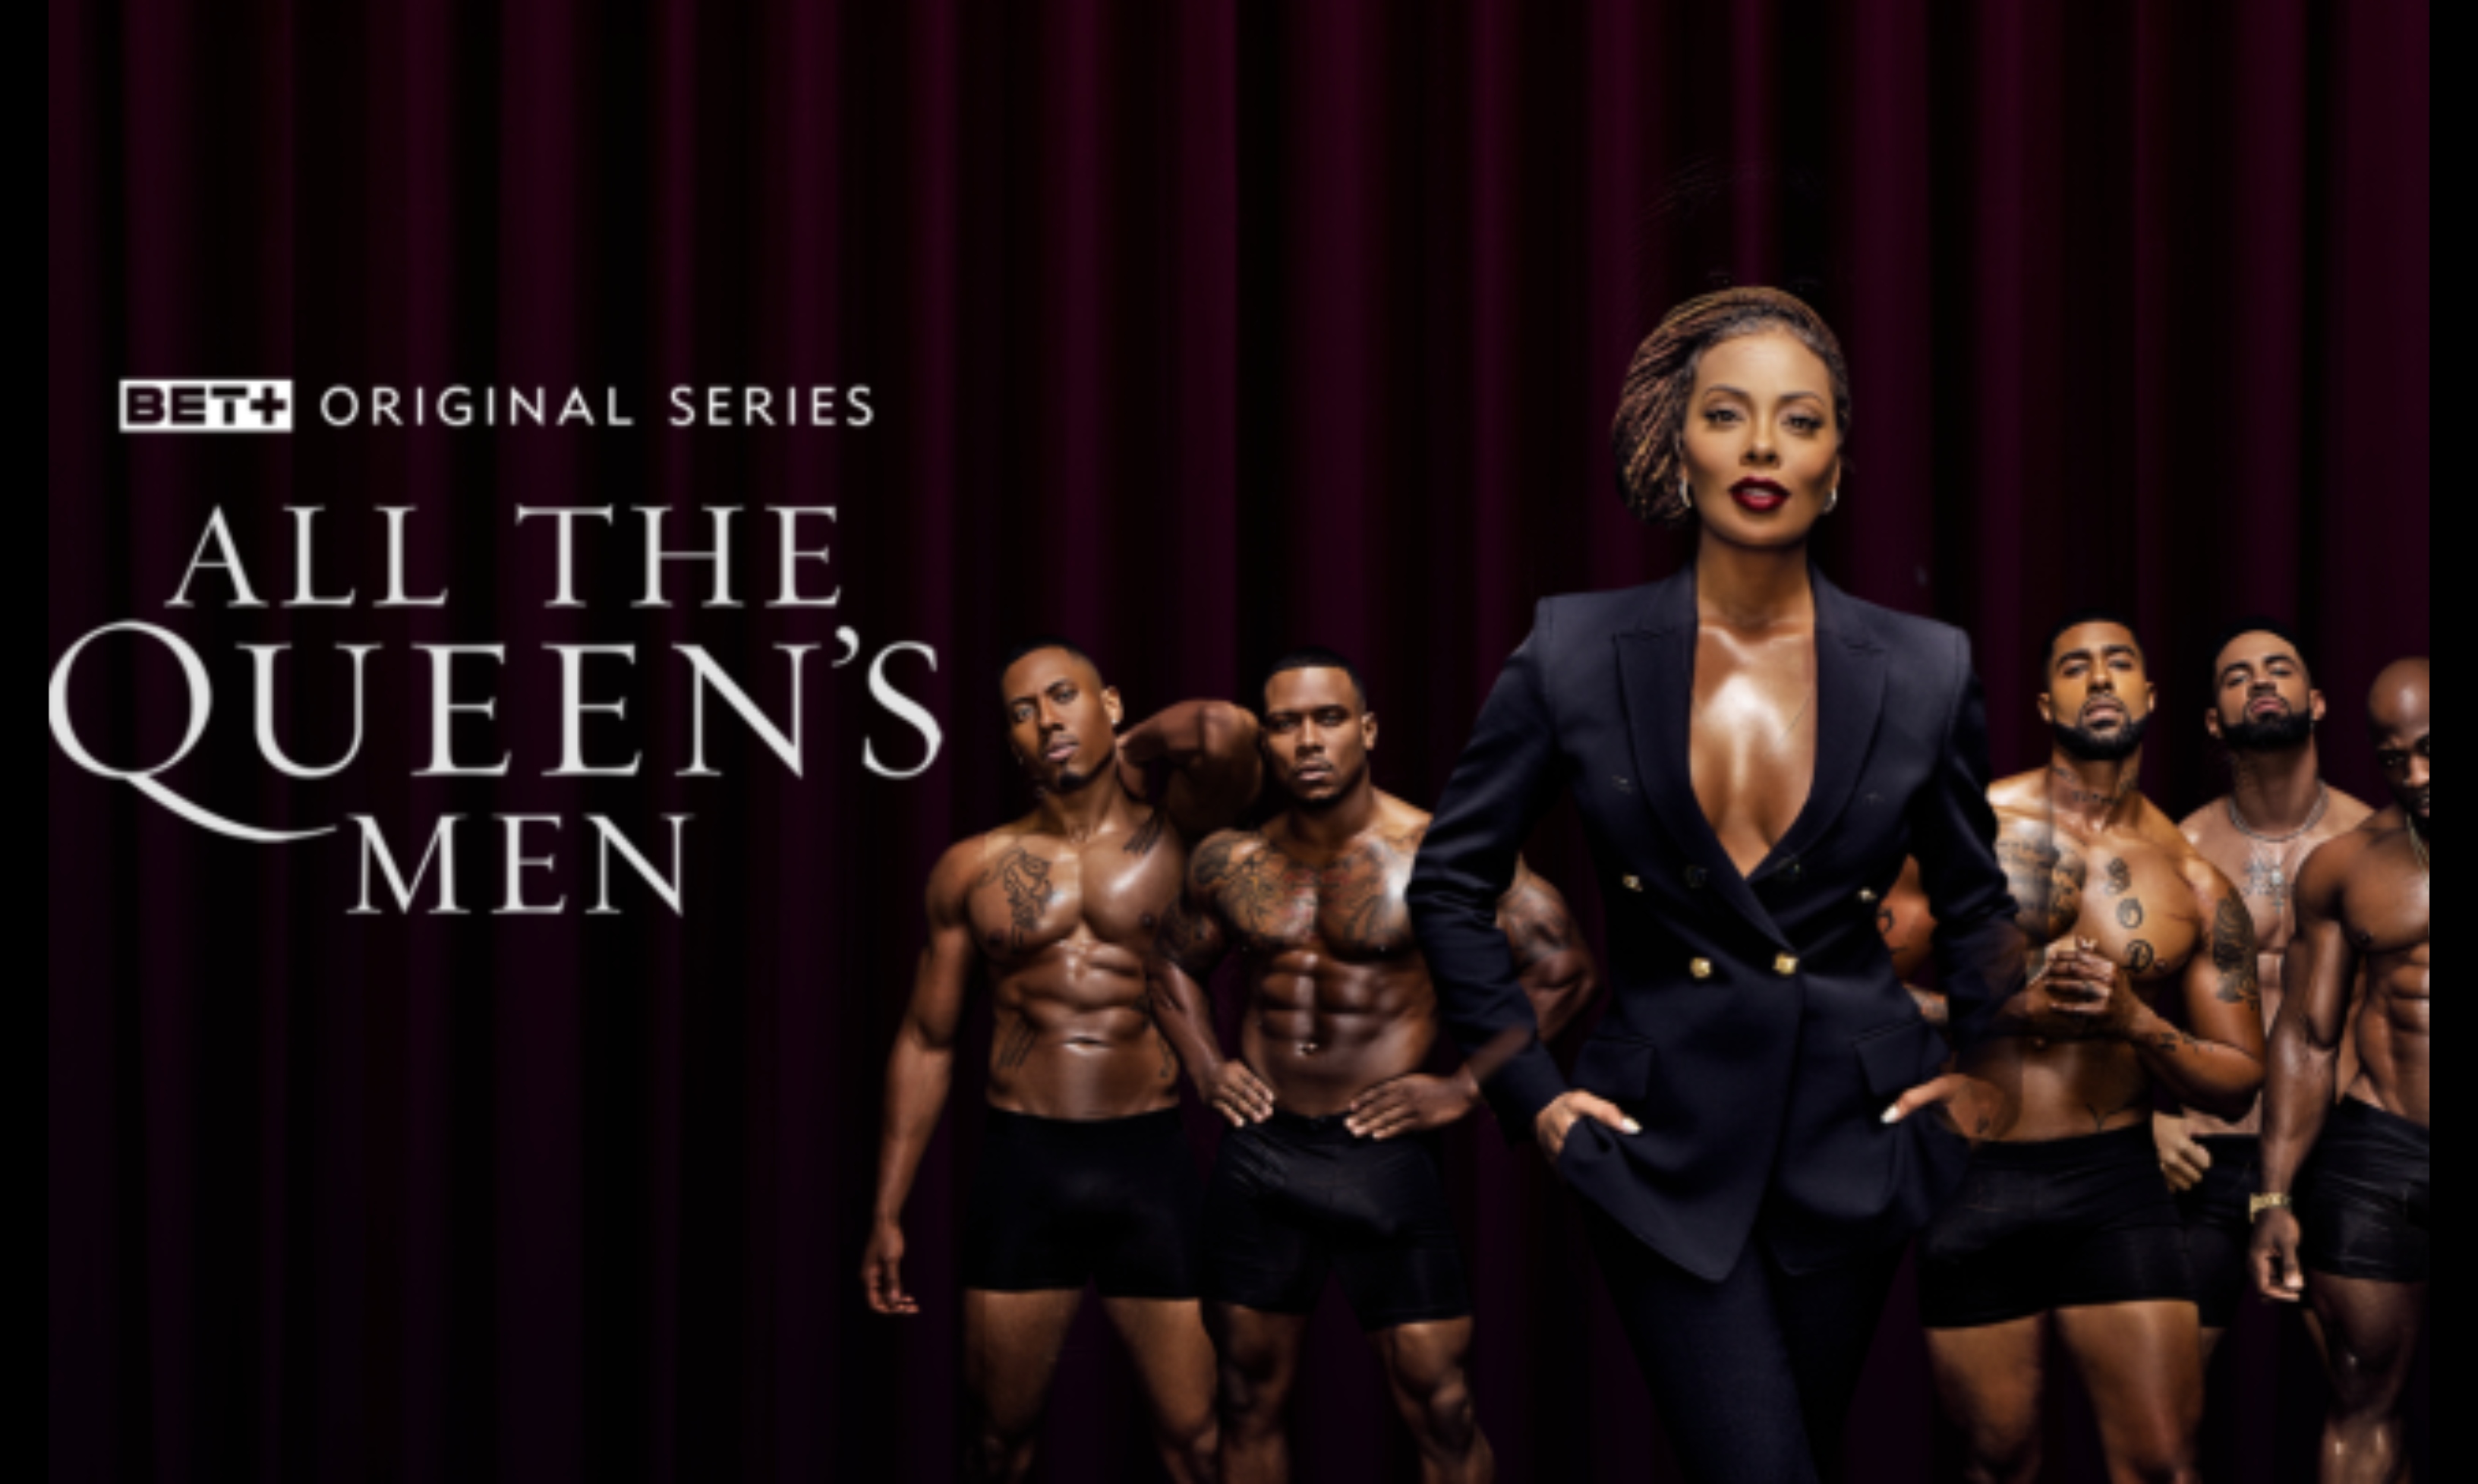 All the Queen's Men Season Two Premiere Date Revealed! Soap Opera News